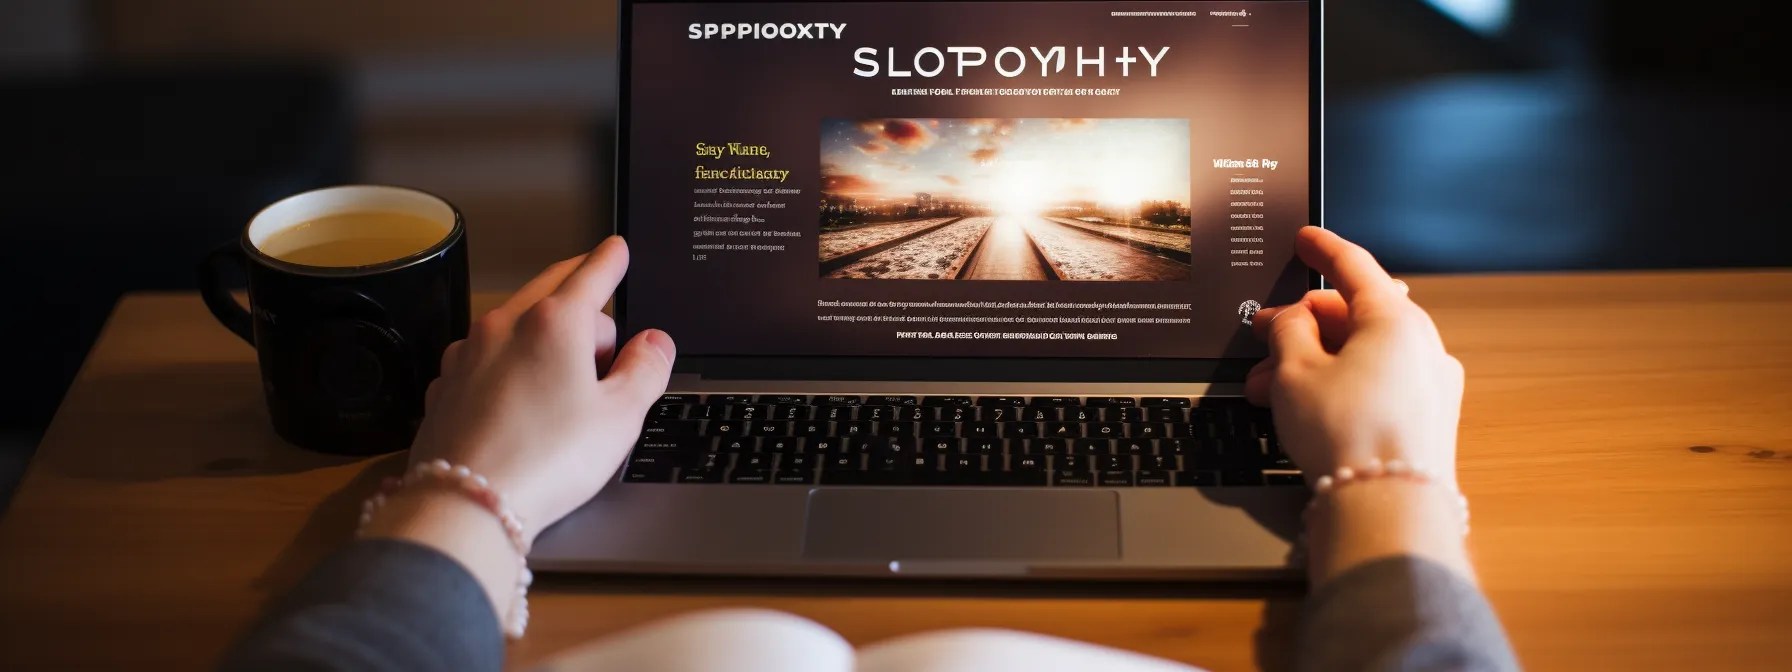 a person holding a copy of seotheory book with a glowing review posted next to a laptop showing improved website traffic.